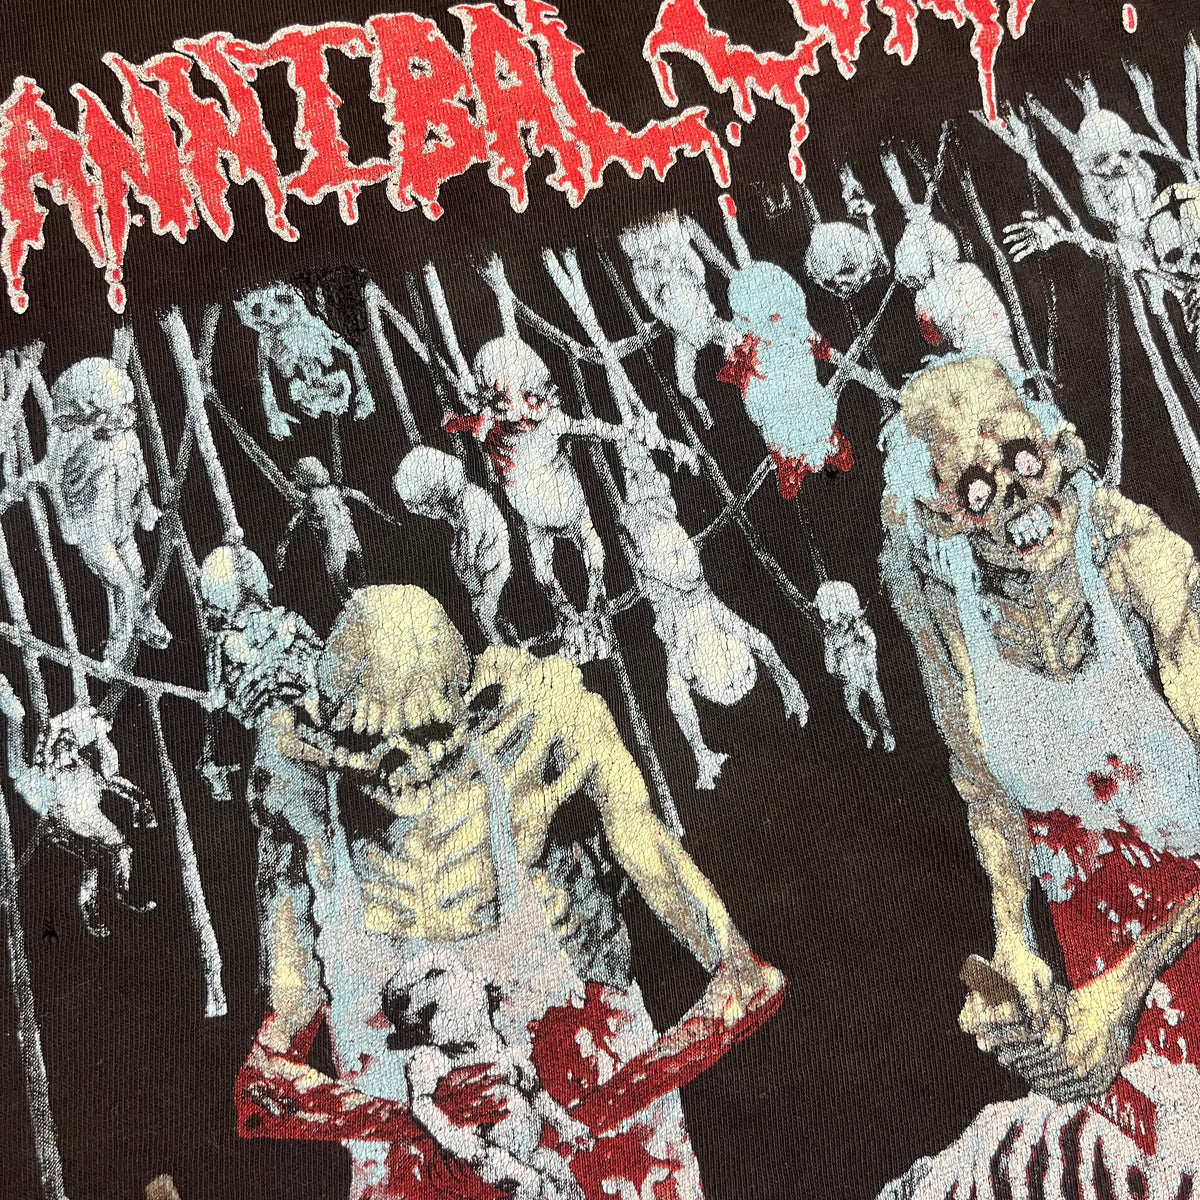 Vintage Cannibal Corpse &quot;Butchered At Birth&quot; T-Shirt